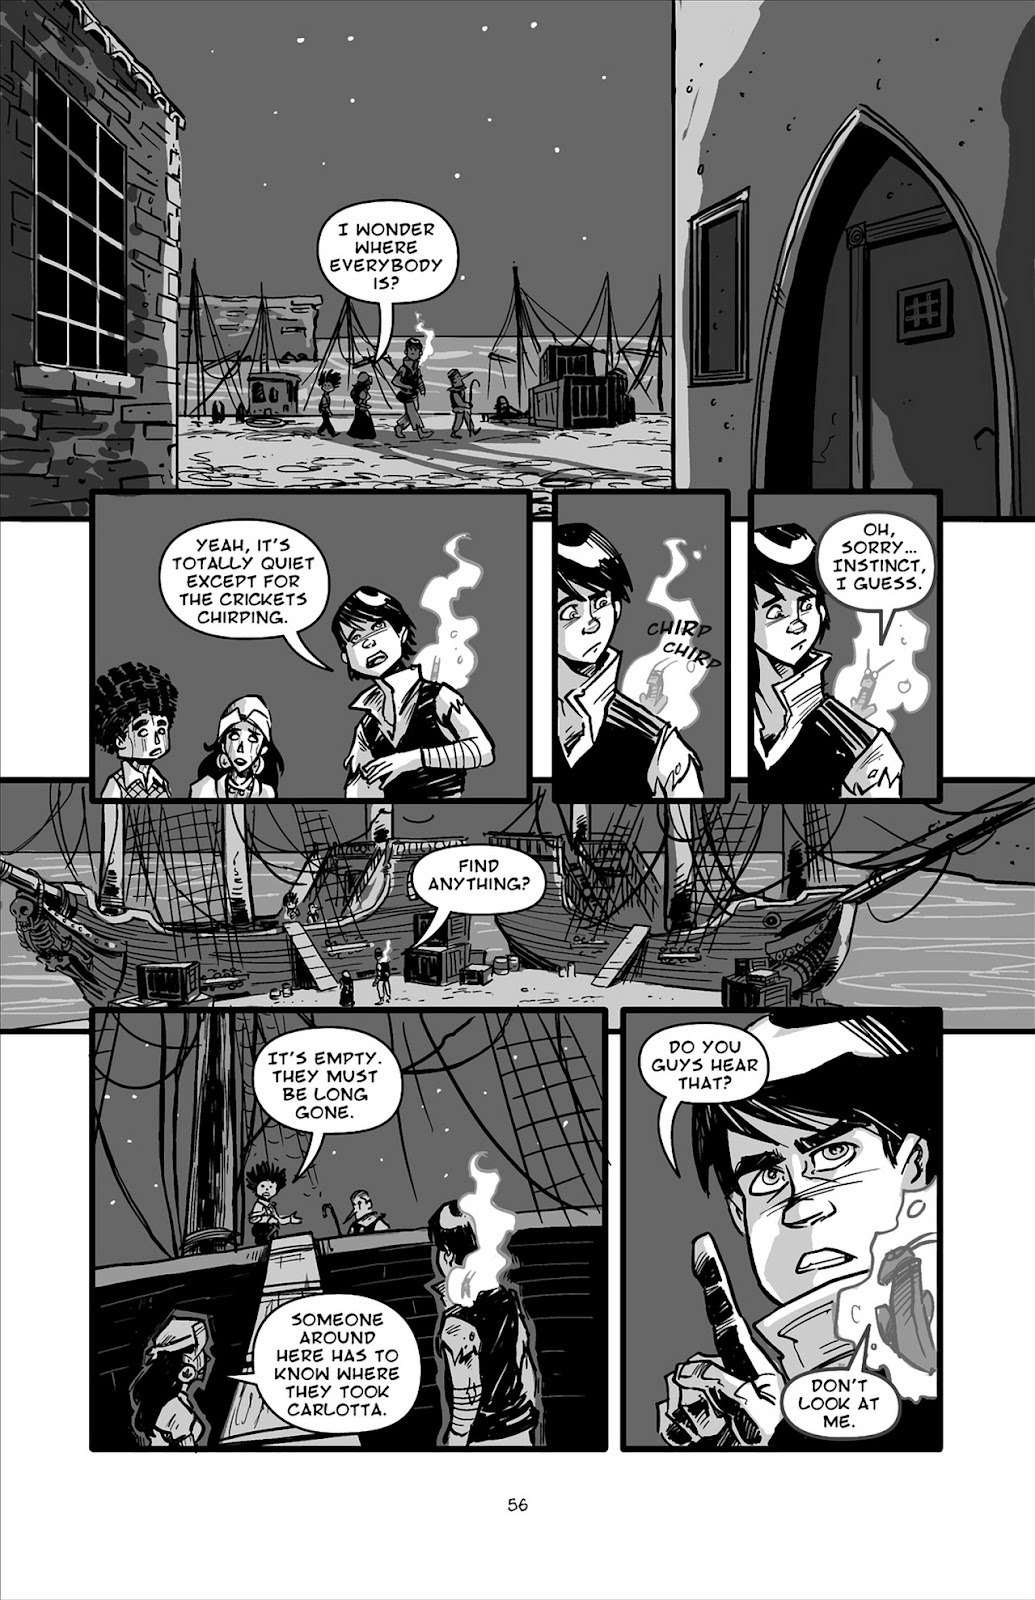 Pinocchio: Vampire Slayer - Of Wood and Blood issue 3 - Page 7